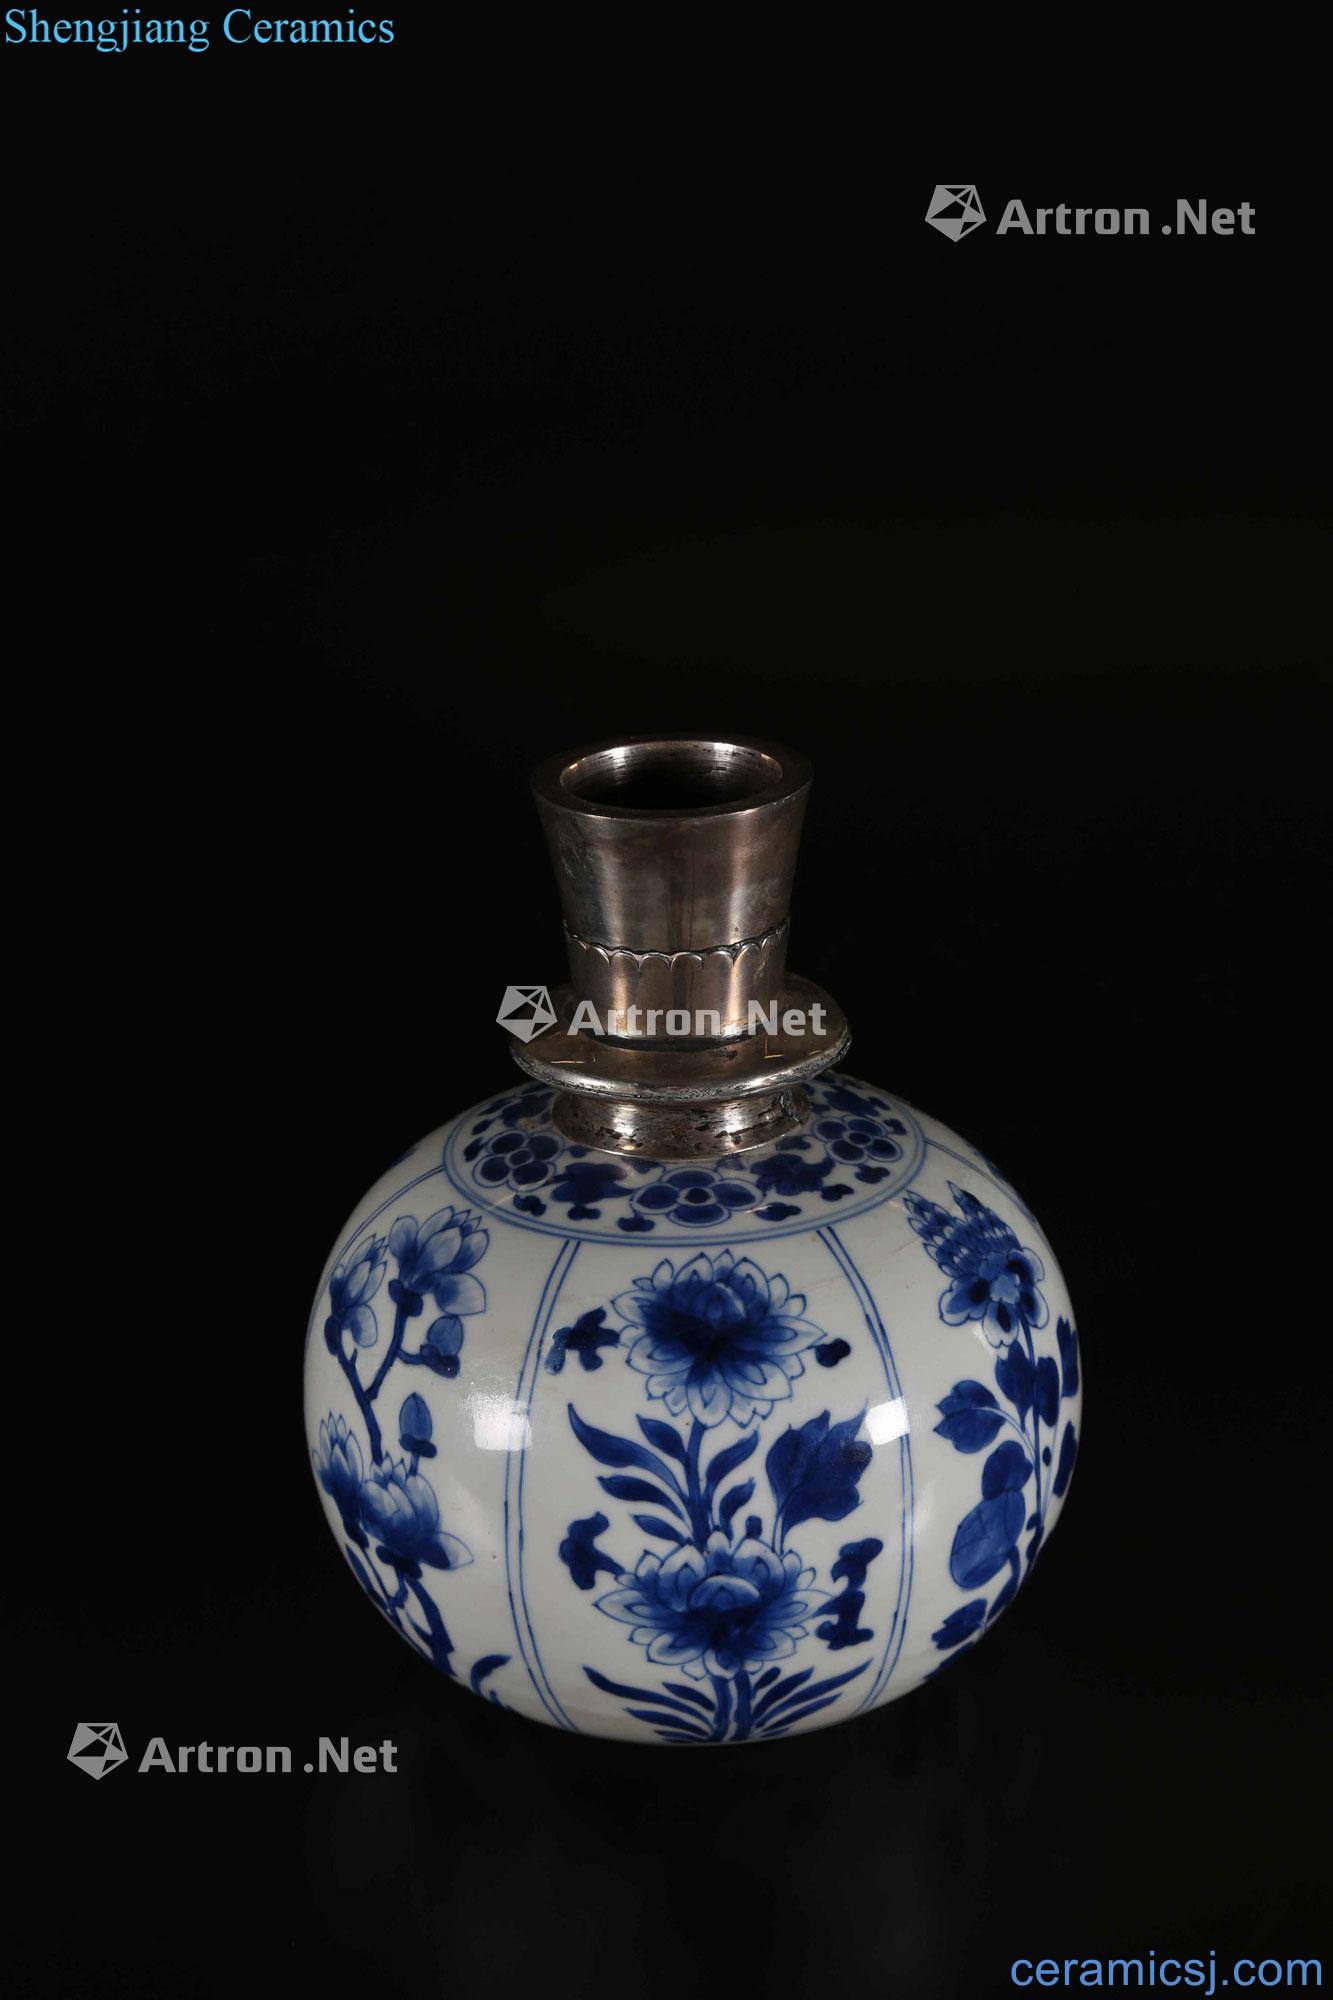 THE Qing Dynasty A BLUE AND WHITE CHINESE PORCELAIN HUQQA BASE MADE FOR ISLAMIC MARKET of CHINA